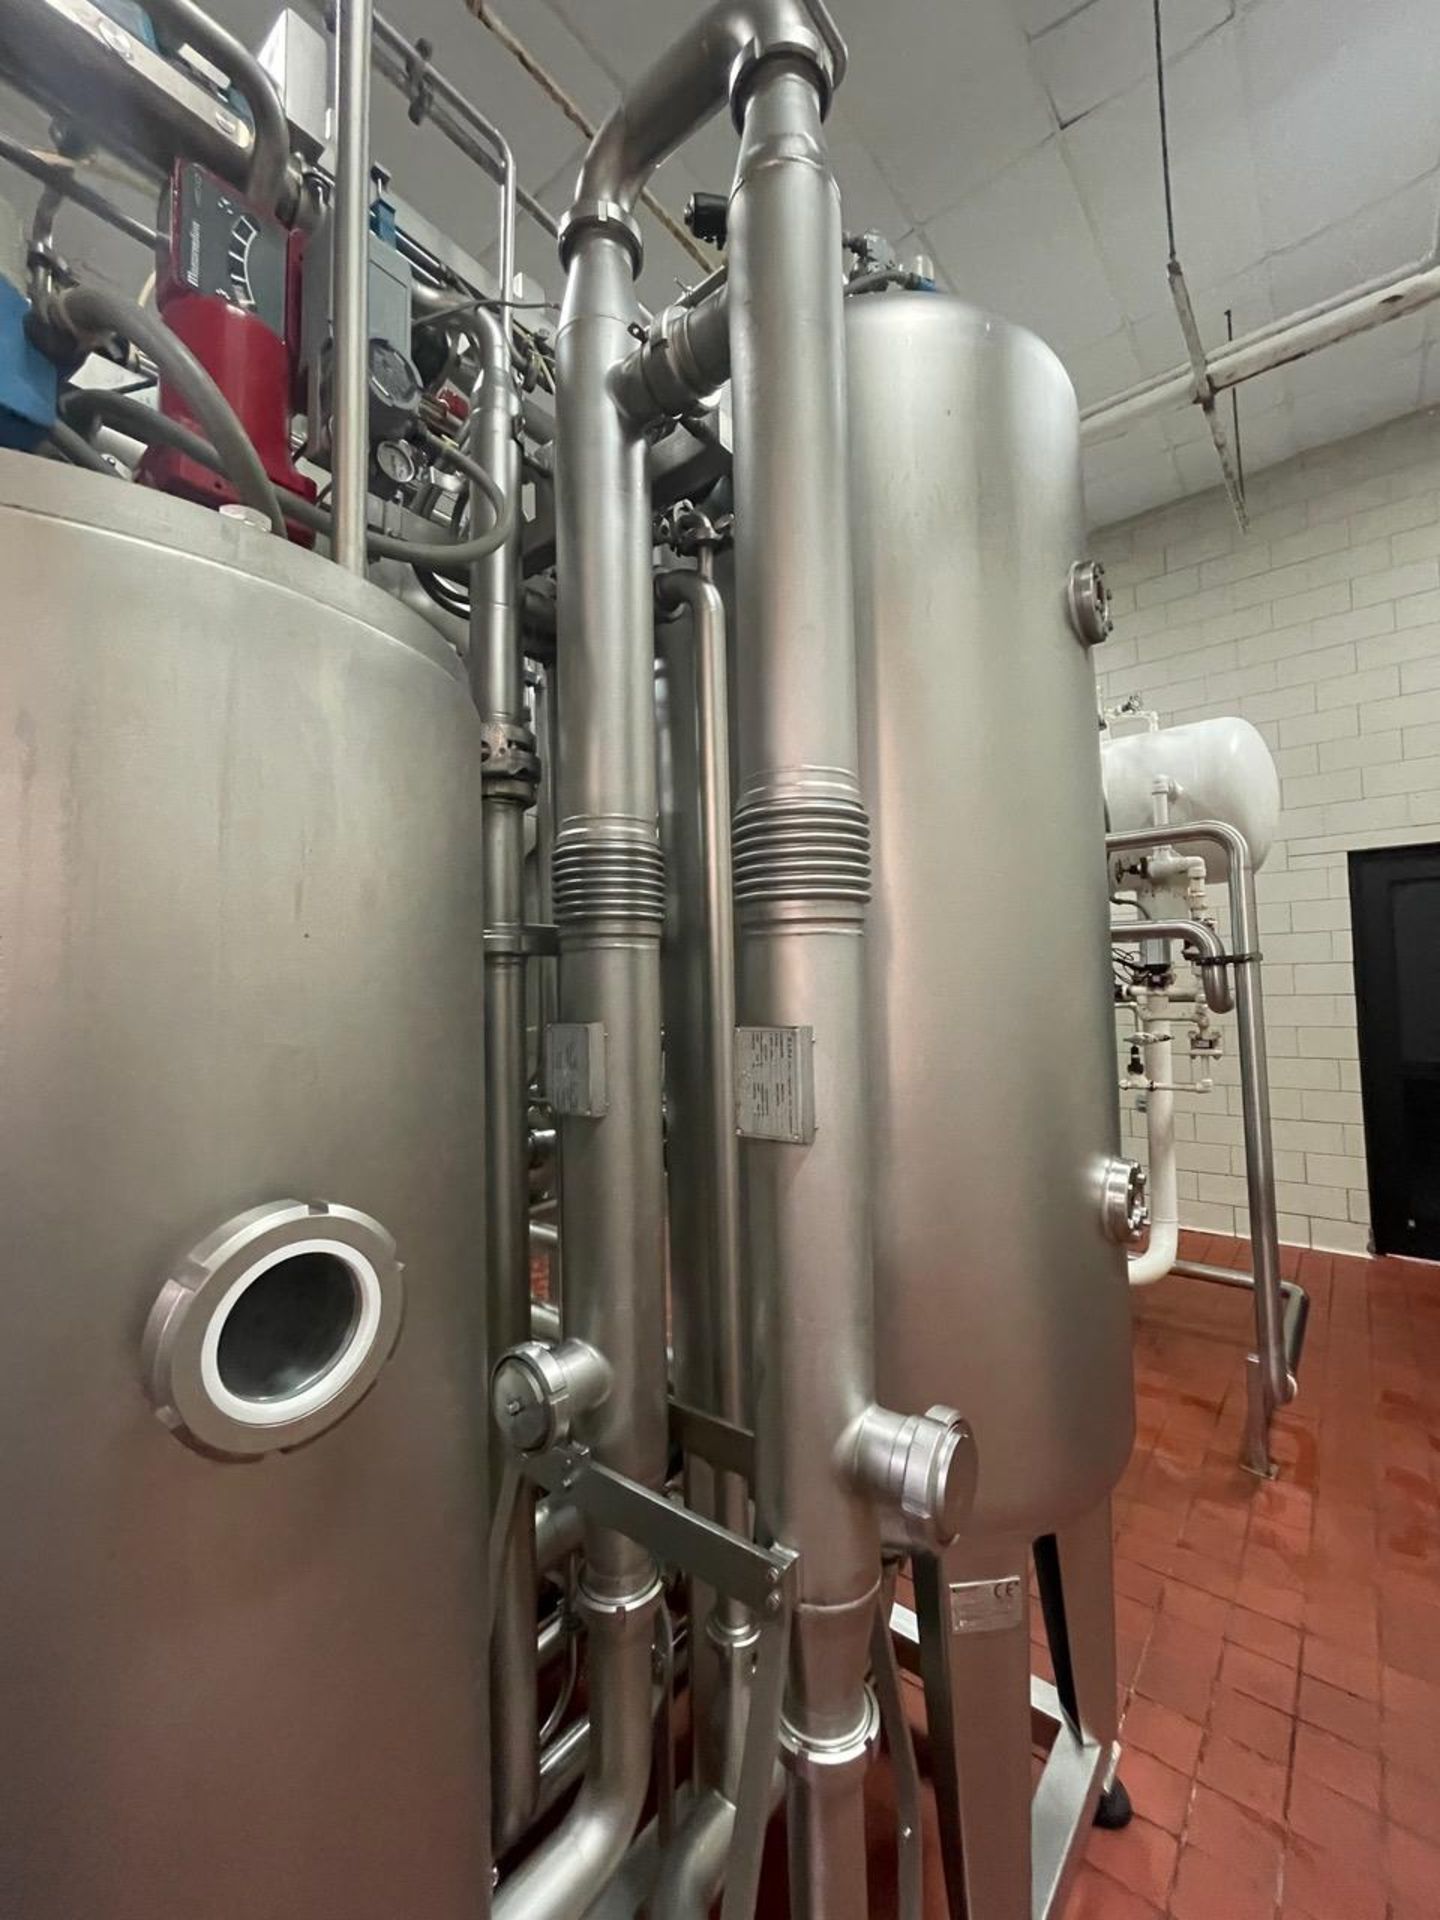 Sidel Alsim High Speed Continuous Softdrink Blending System - Model MAS MIX 30000L | Rig Fee $2000 - Image 4 of 10